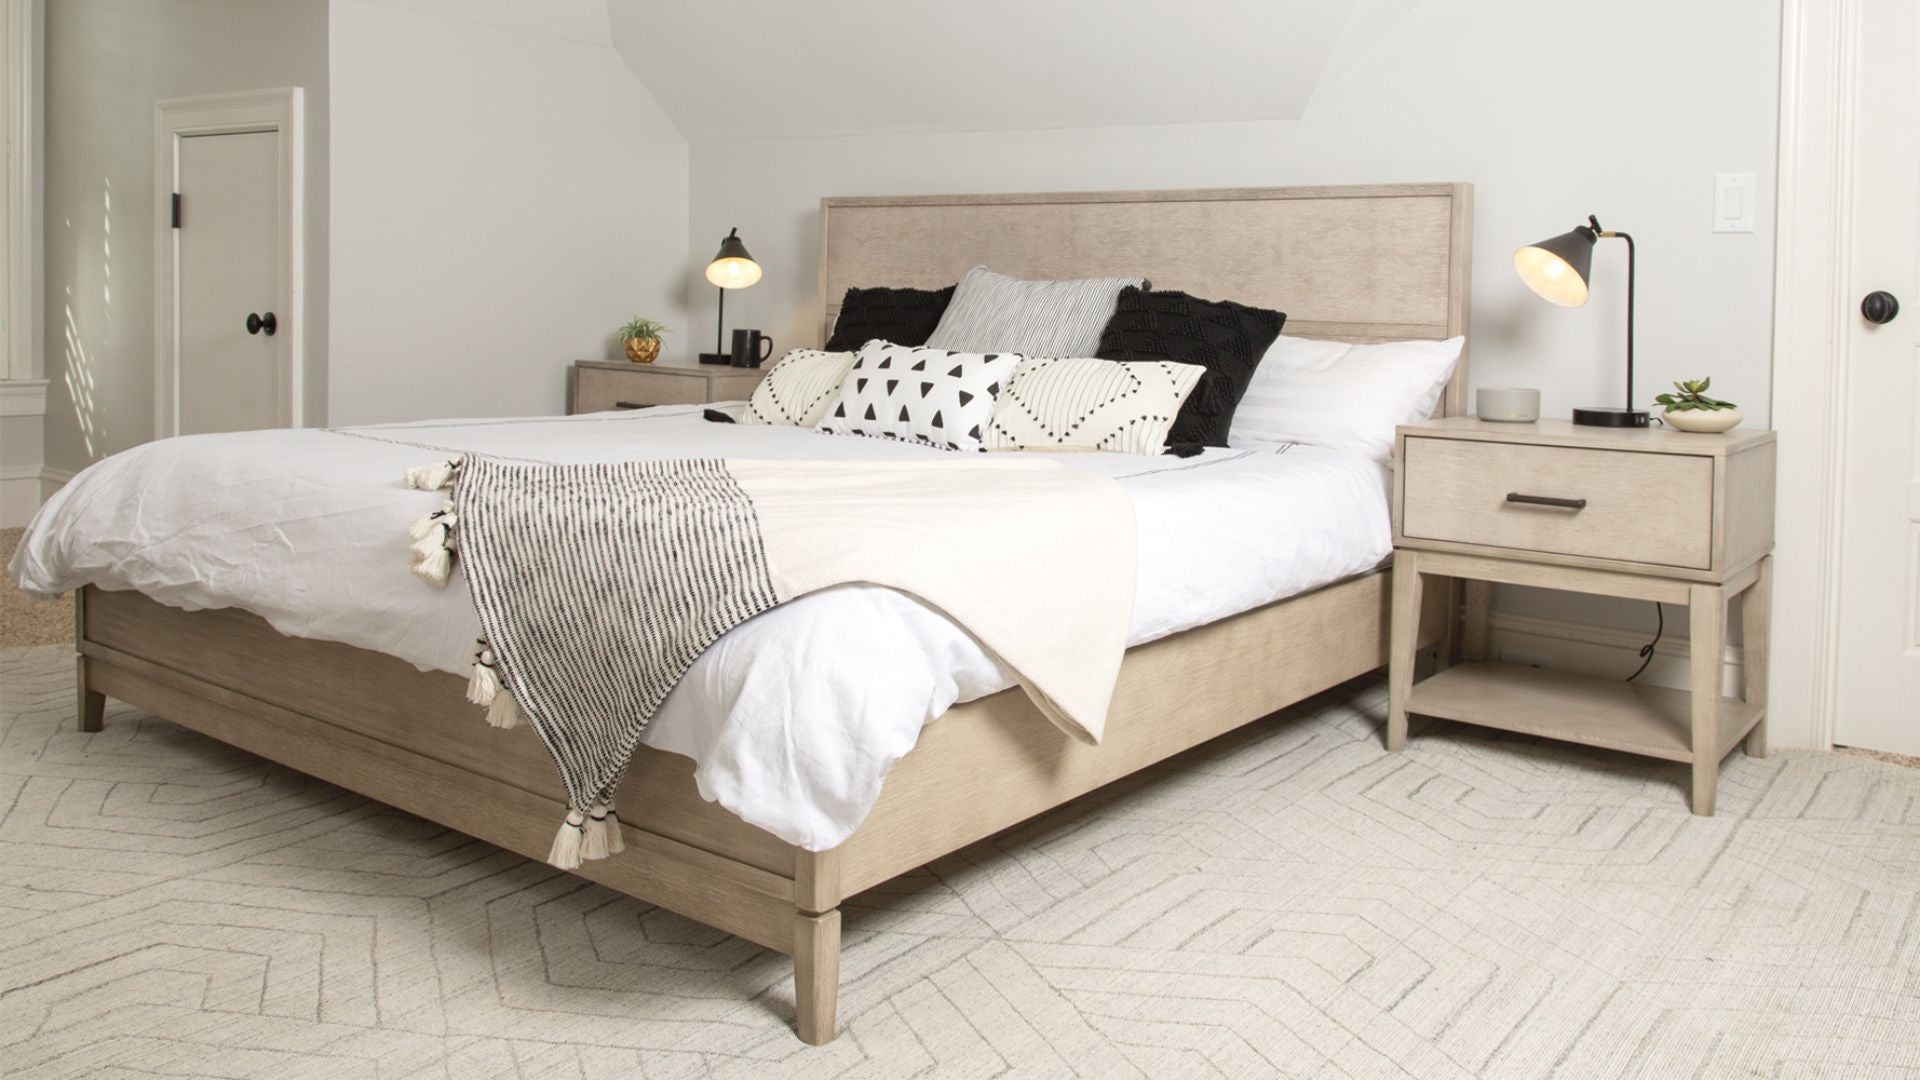 natural wood bed frame and modern nightstands